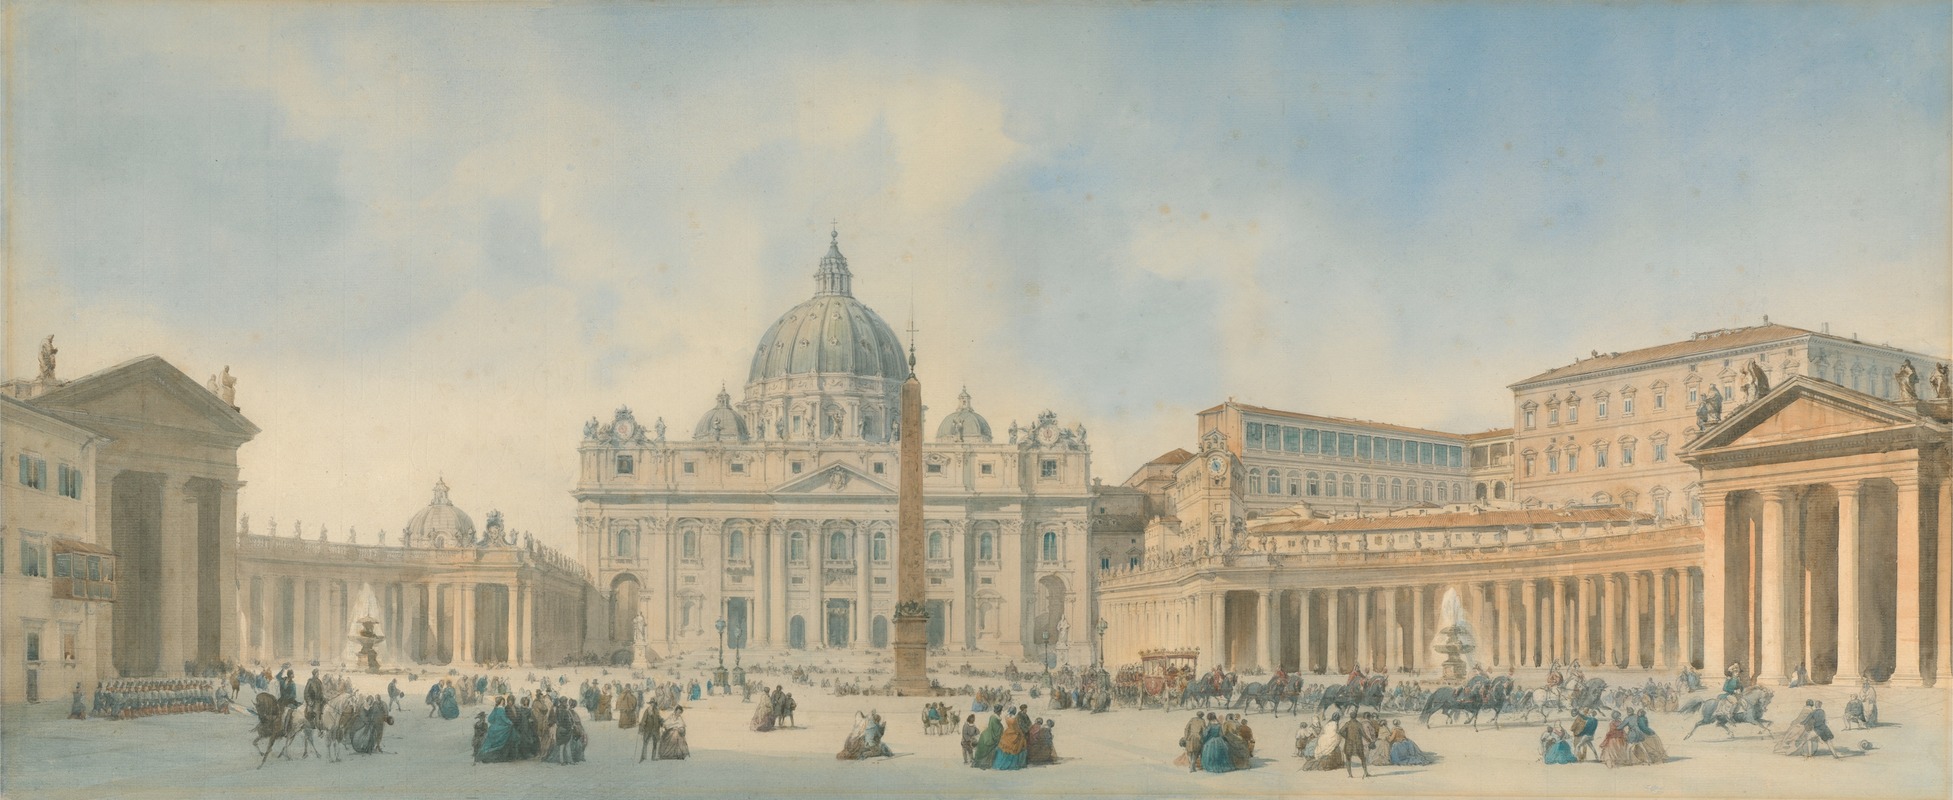 David Roberts - View of St. Peters, Rome